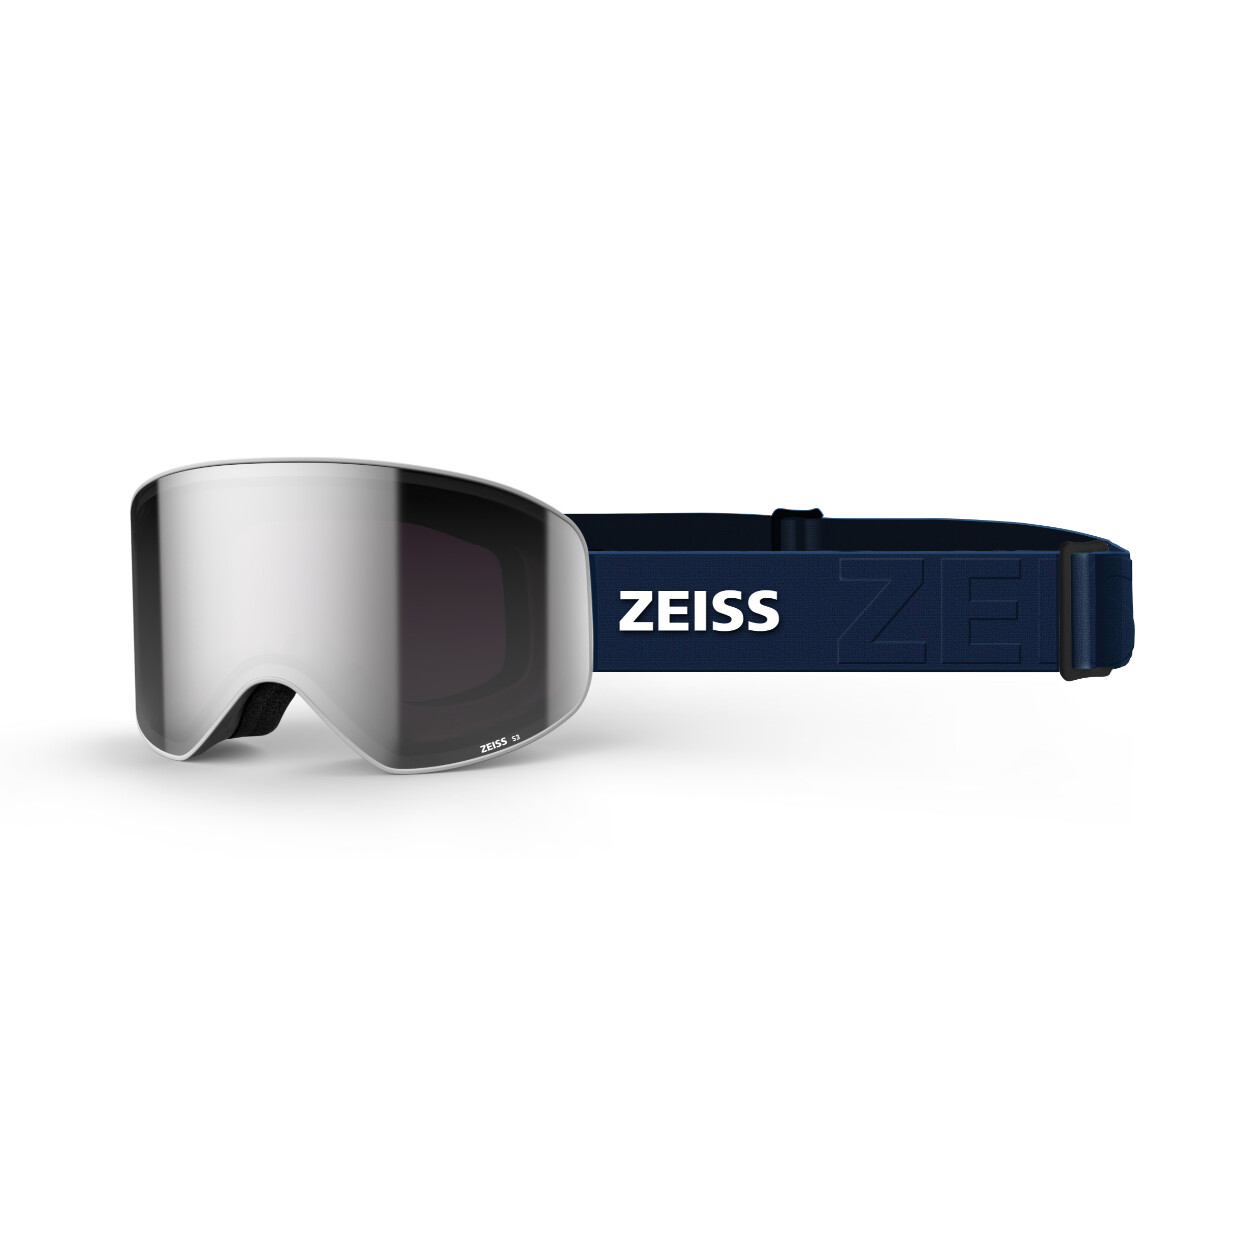 Zeiss snow goggle cylindrical white - ML extra white lens